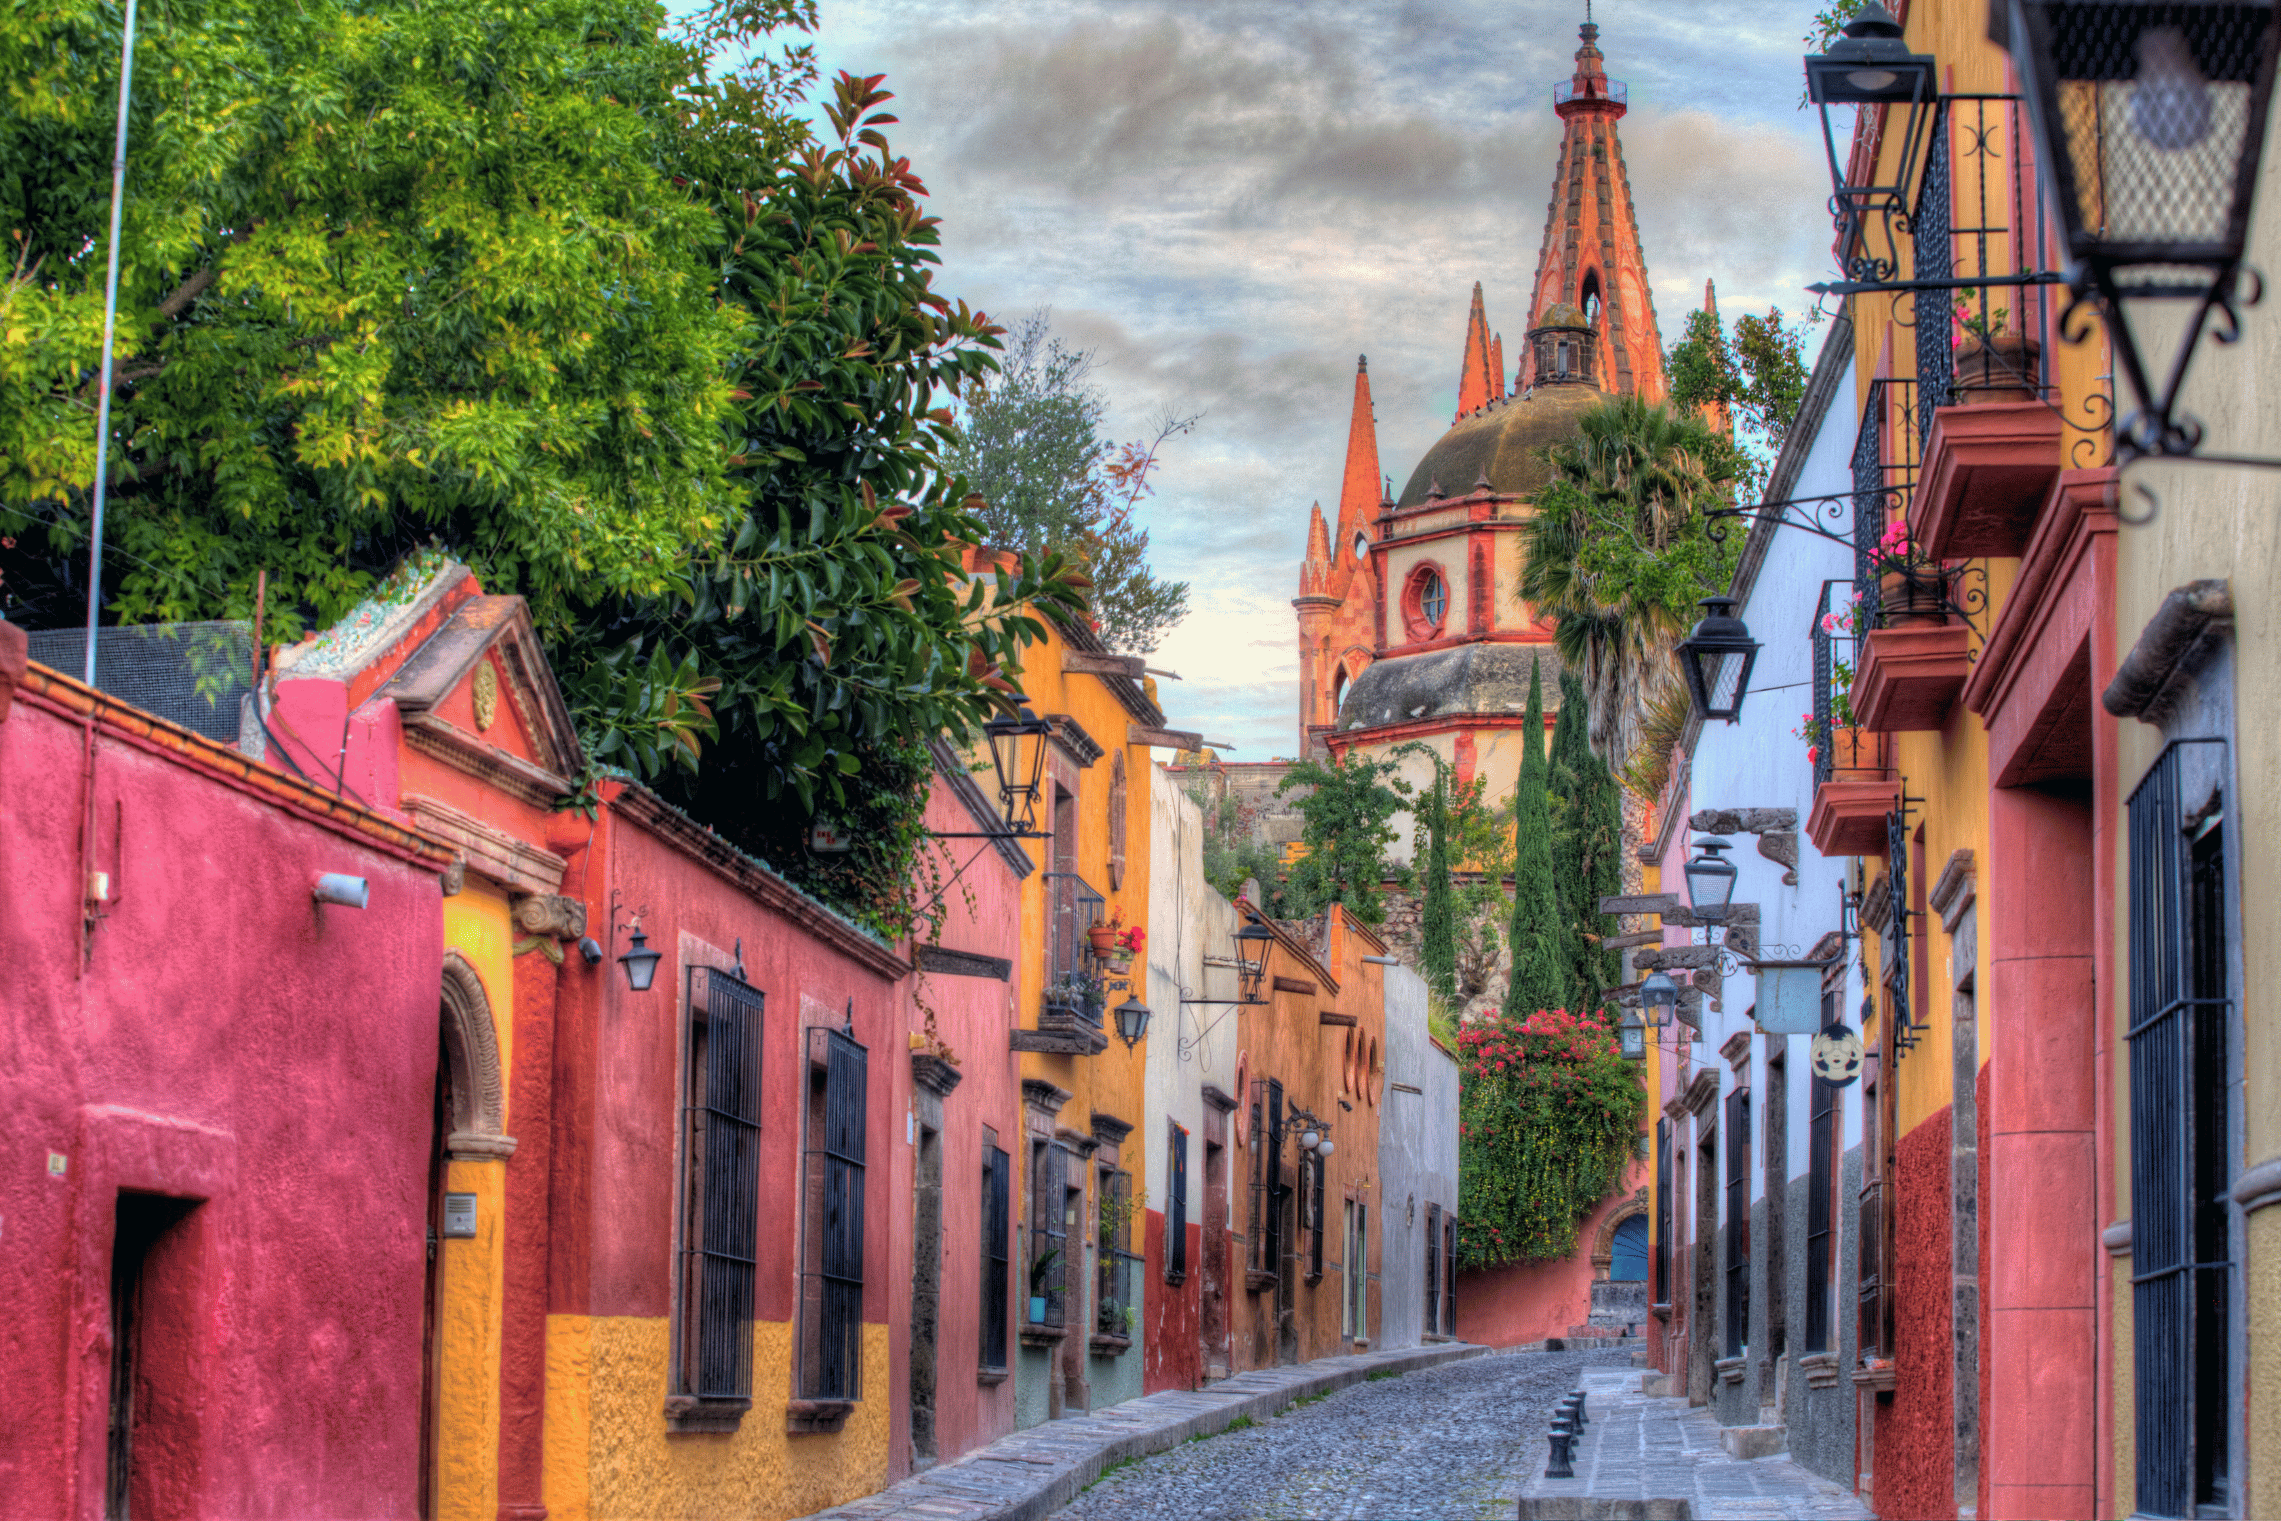 An image of a brightly coloured neighborhood in San Miguel.